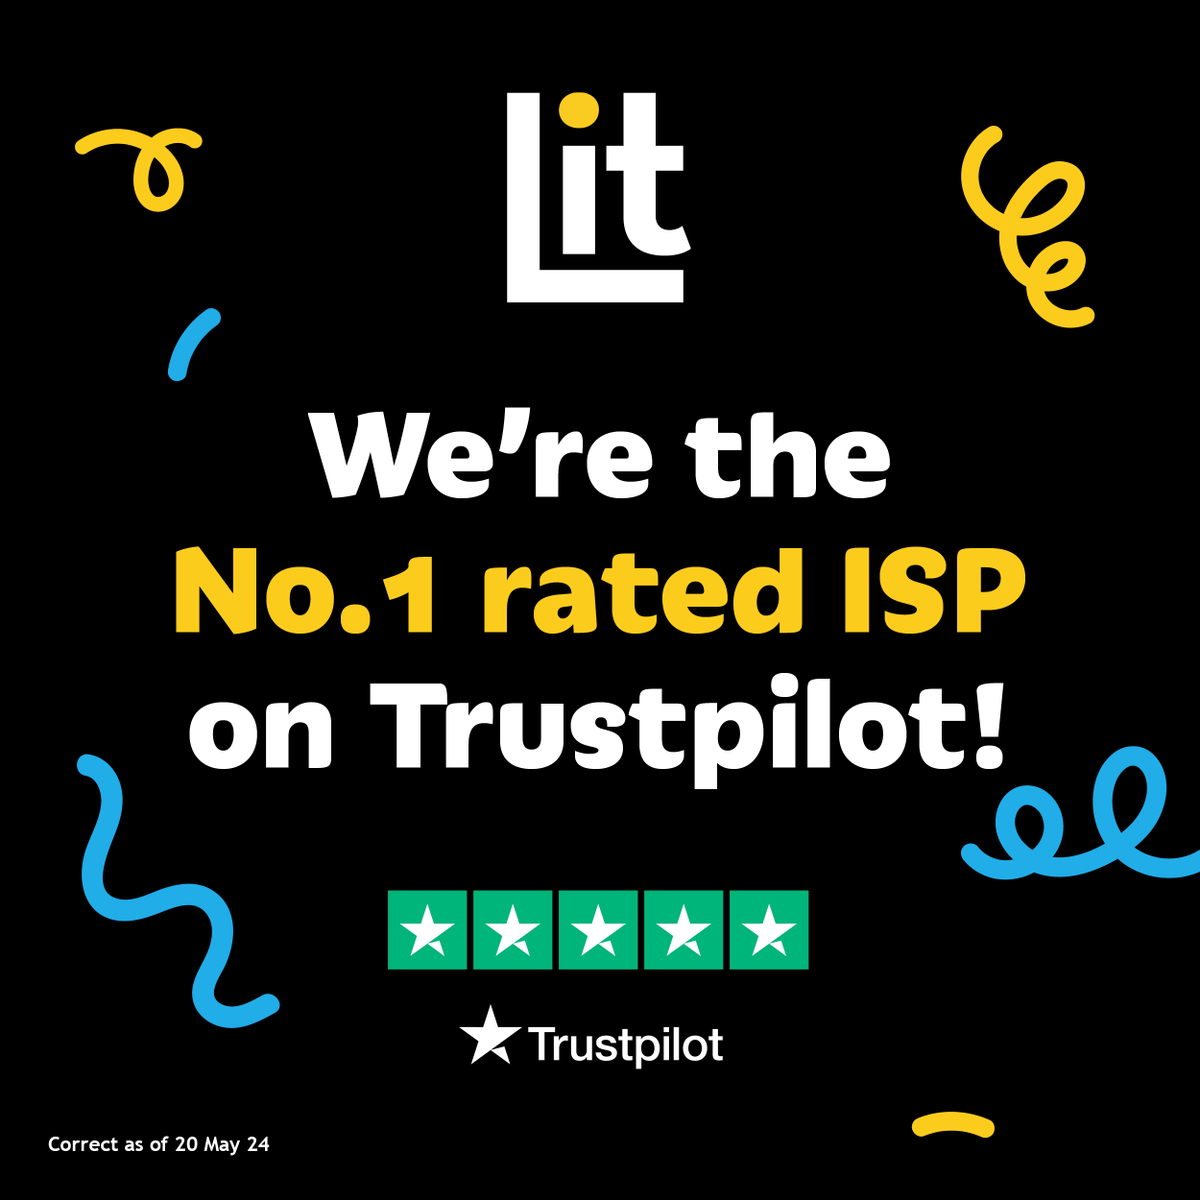 We’re so flattered to be No.1 rated Internet Service Provider on #Trustpilot ✨ It shows how #InternetDoneProperly and supporting our customers has paid off, leaving us with a bunch of super happy customers! Wish you could be this happy with your internet? litfibre.com